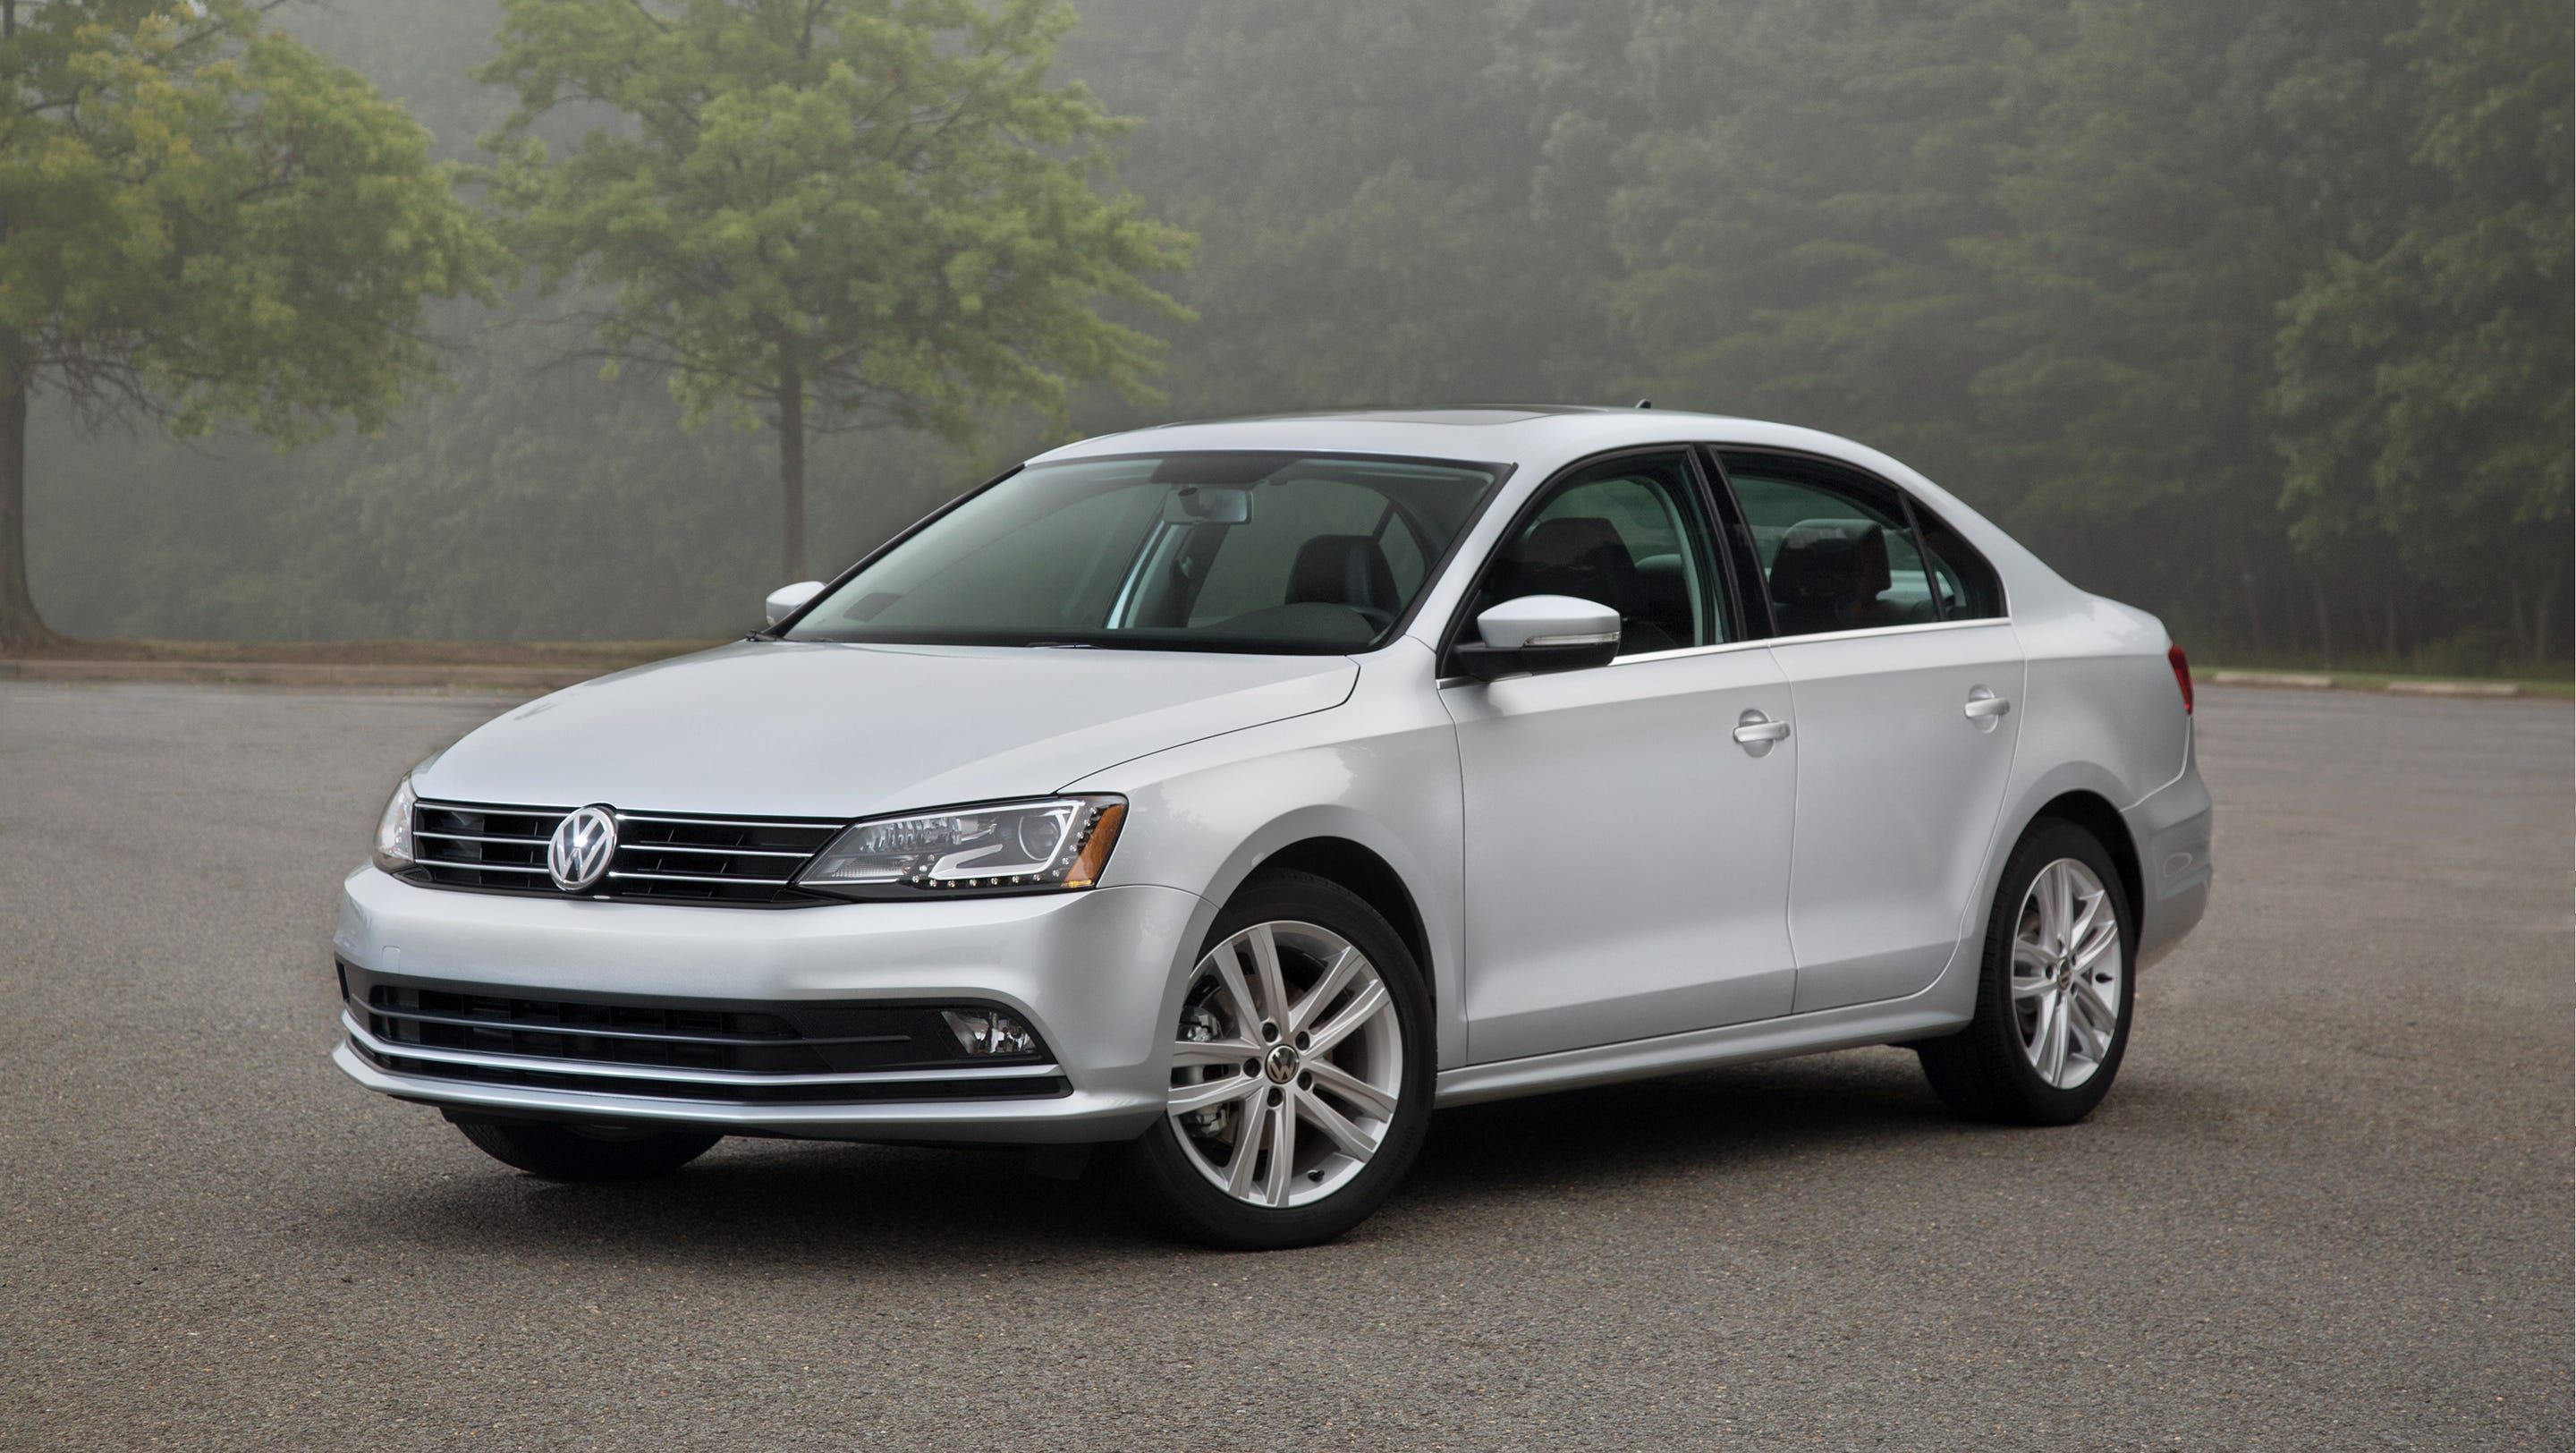 2015 VW Jetta, new where you can't see